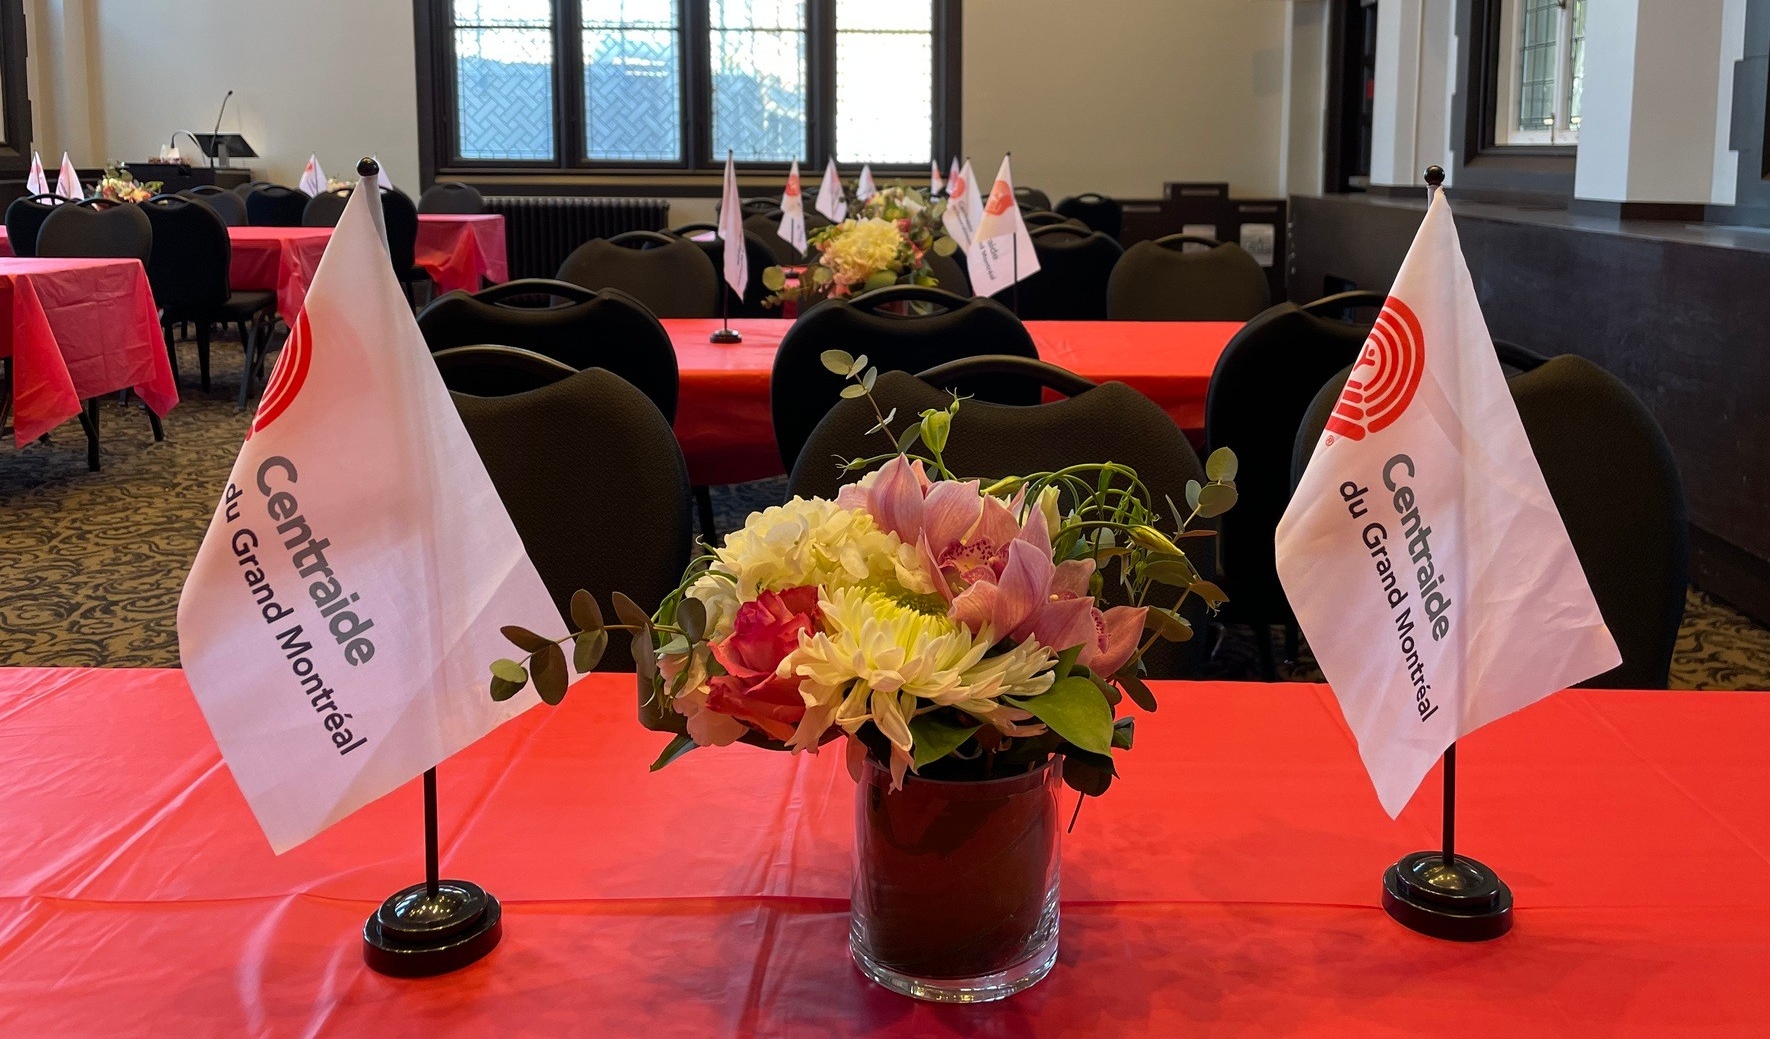 Two Centraide flags sit on a table with a bouquet of flowers in between them.